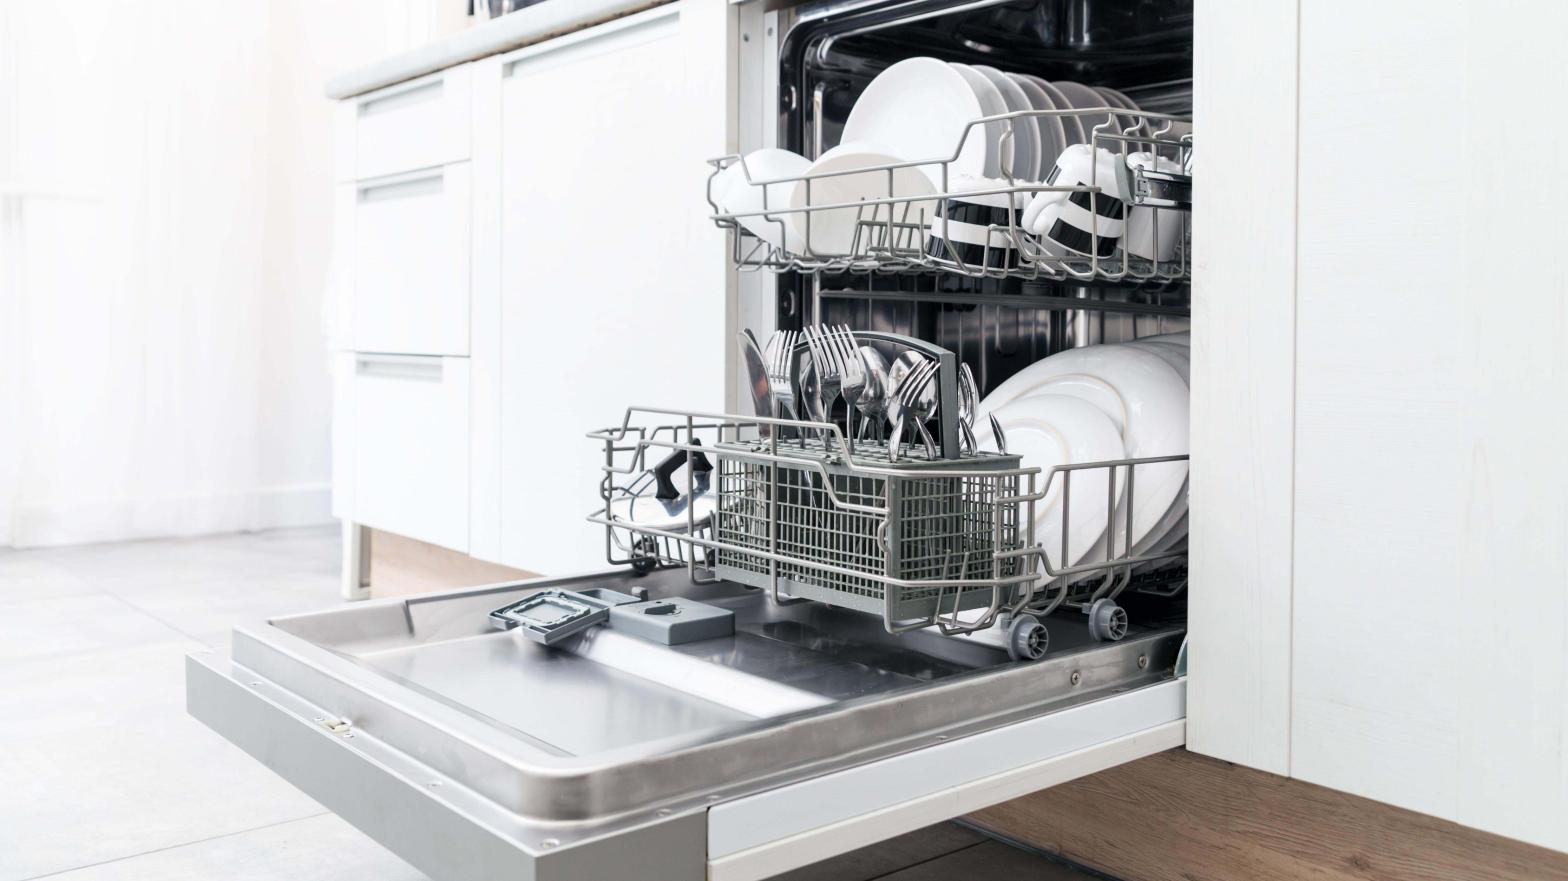 Why You Should Stick a Towel in Your Dishwasher